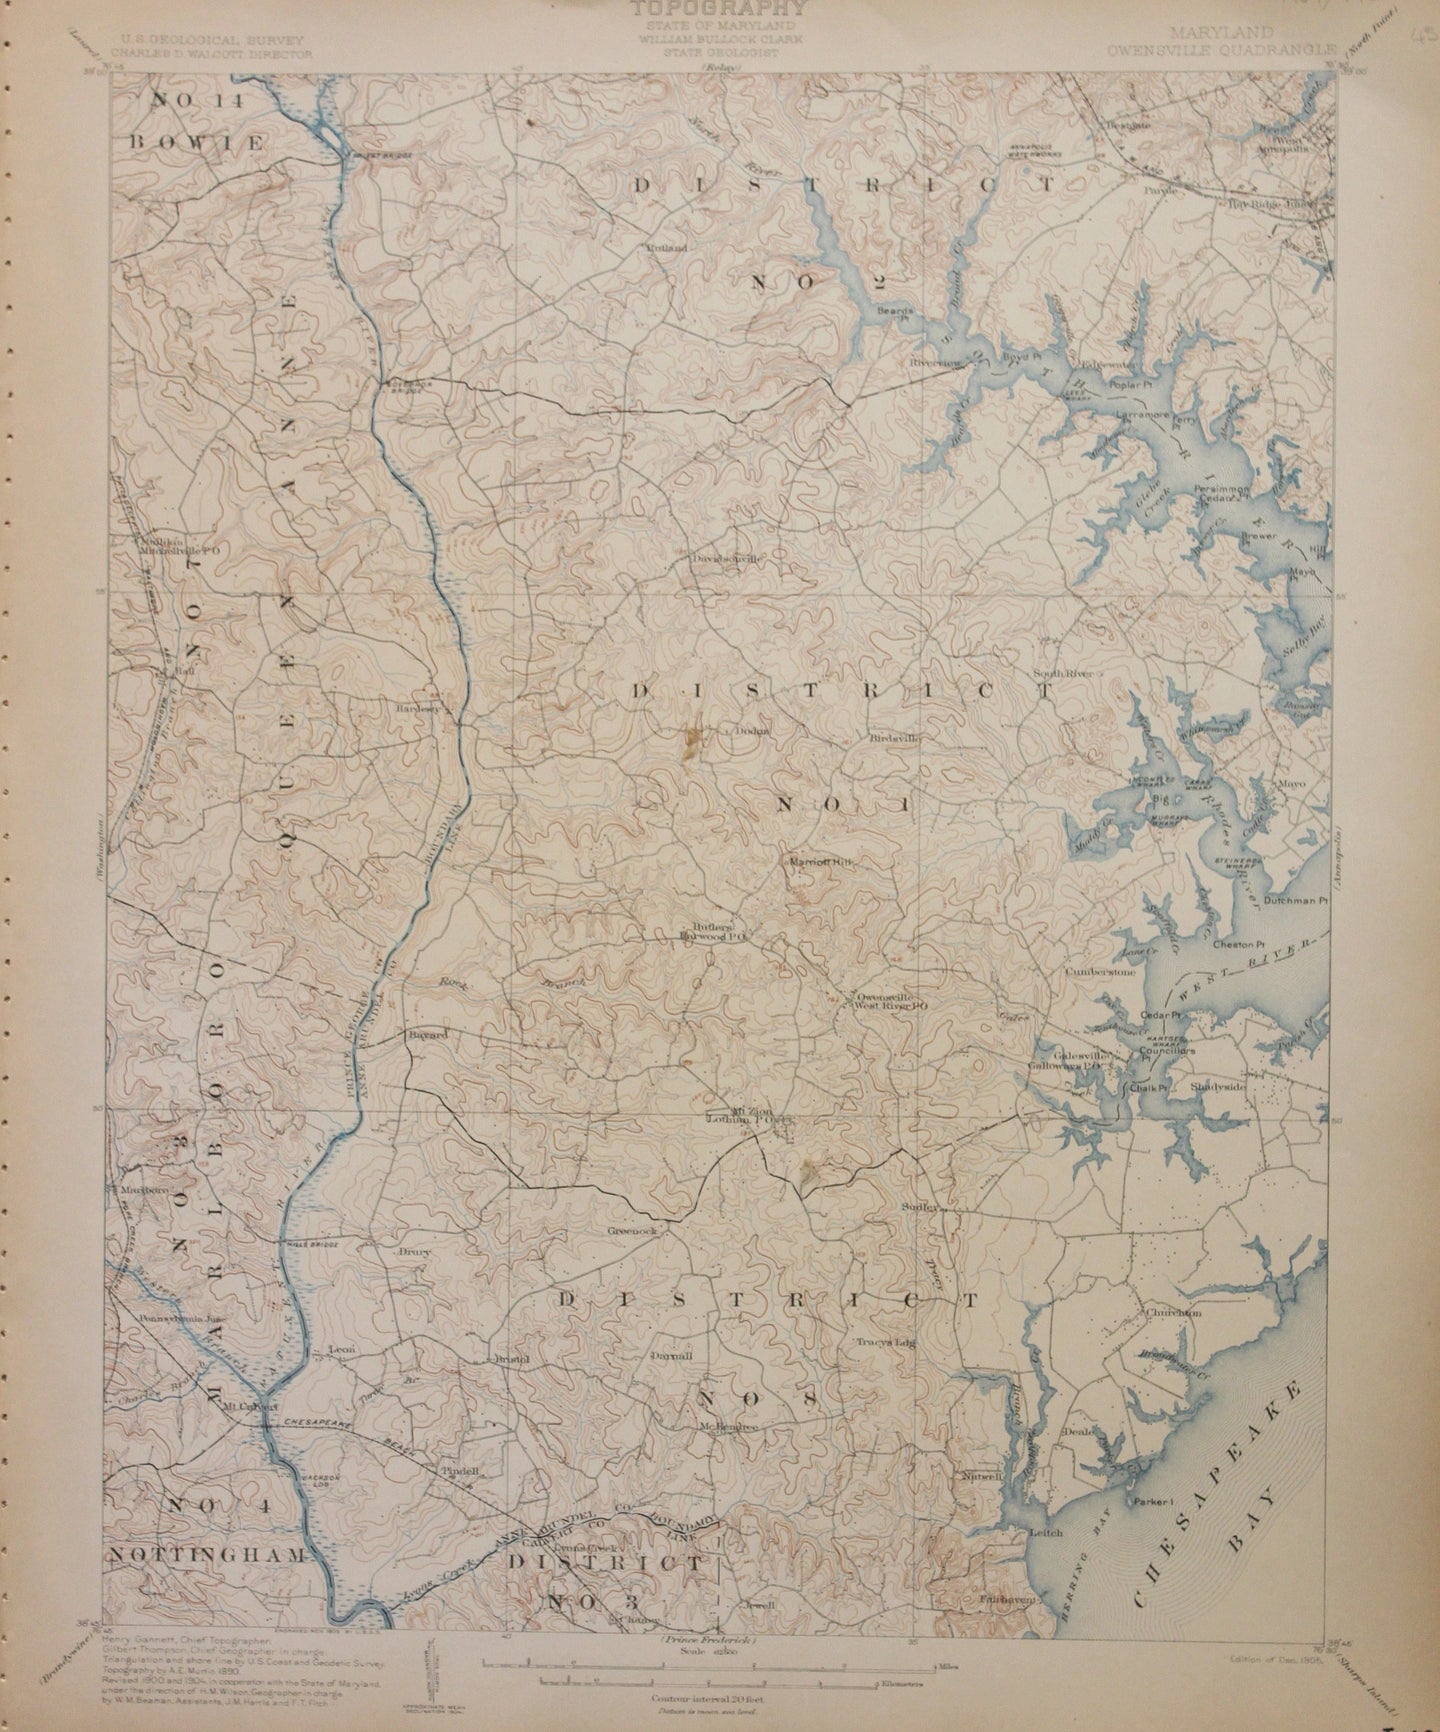 Genuine-Antique-Map-Owensville-Maryland--1905-U-S-Geological-Survey--Maps-Of-Antiquity